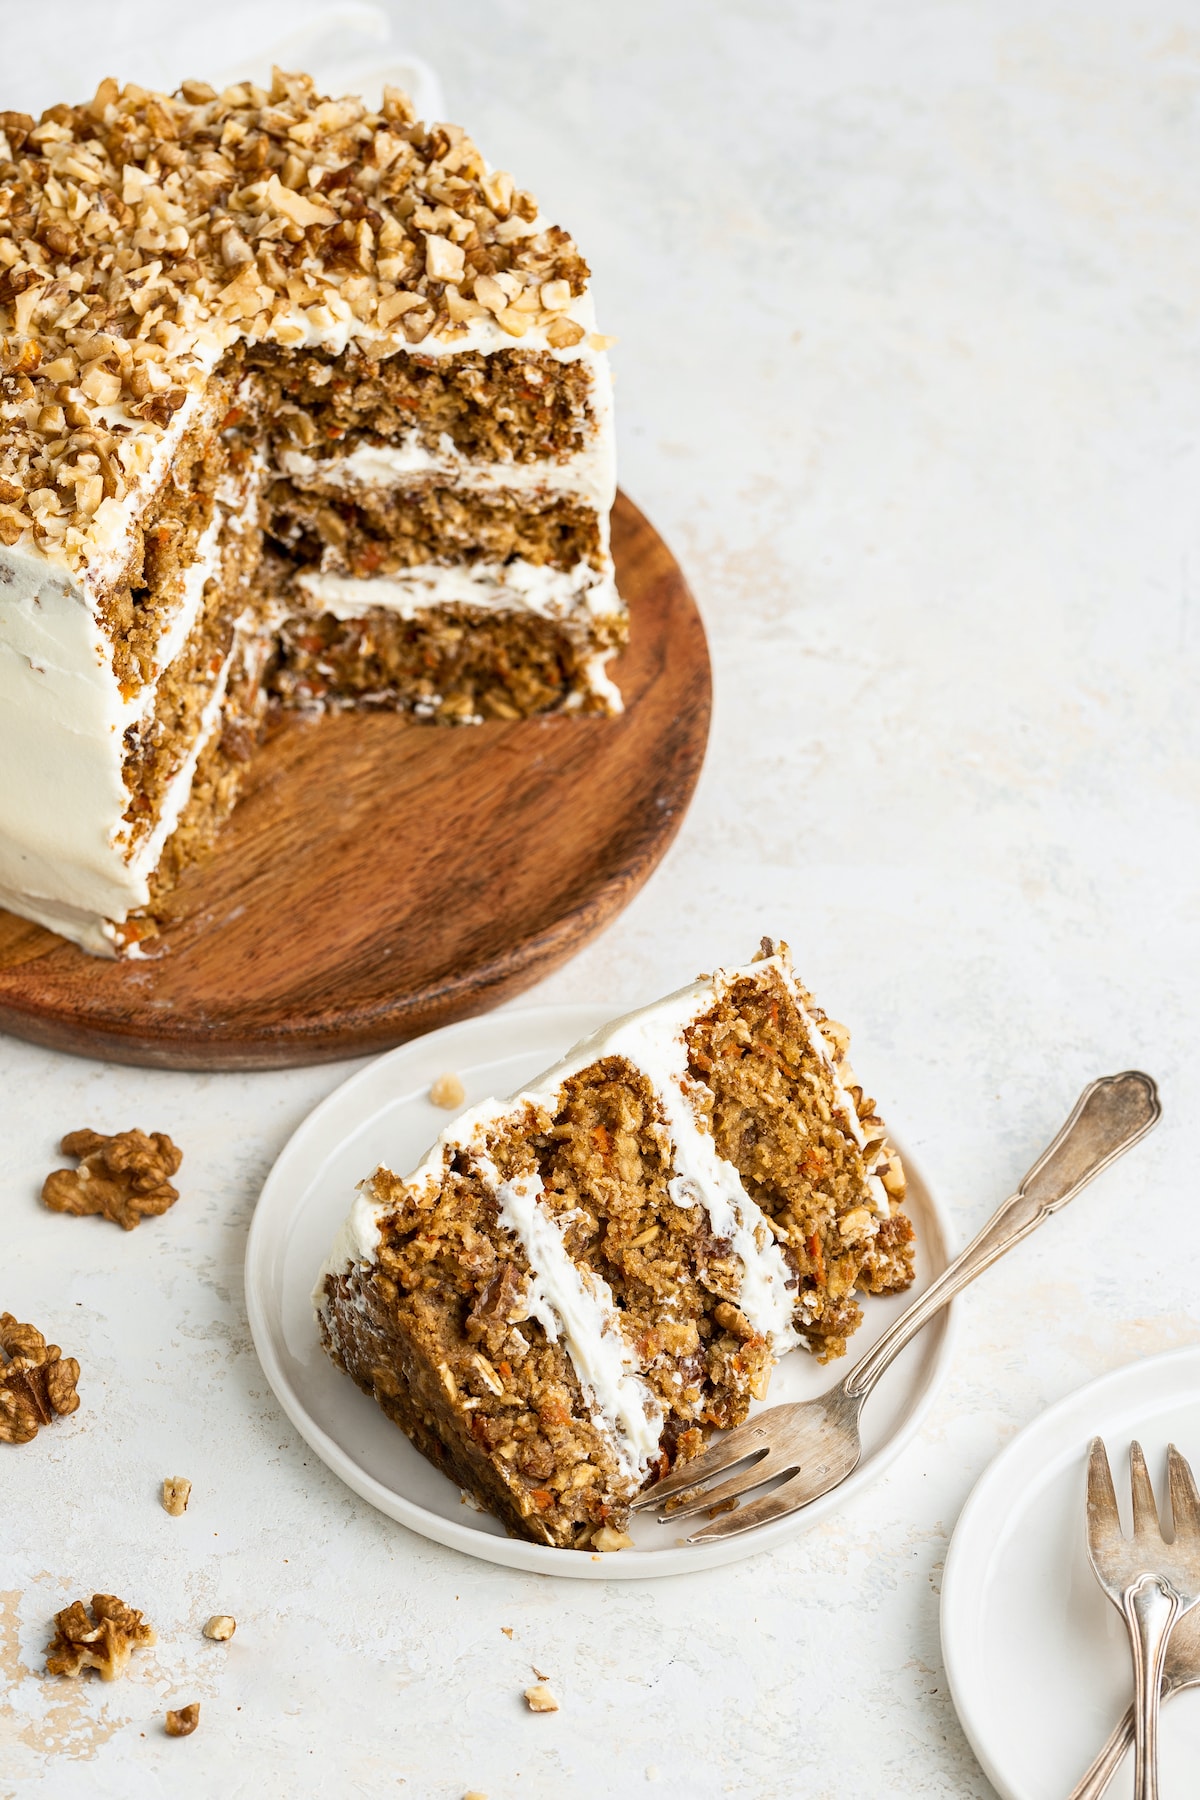 A slice of a 3-layer oatmeal carrot cake served on a white plate with a fork. The full 3-layer oatmeal carrot cake is behind the plate on a wooden board with the center exposed.